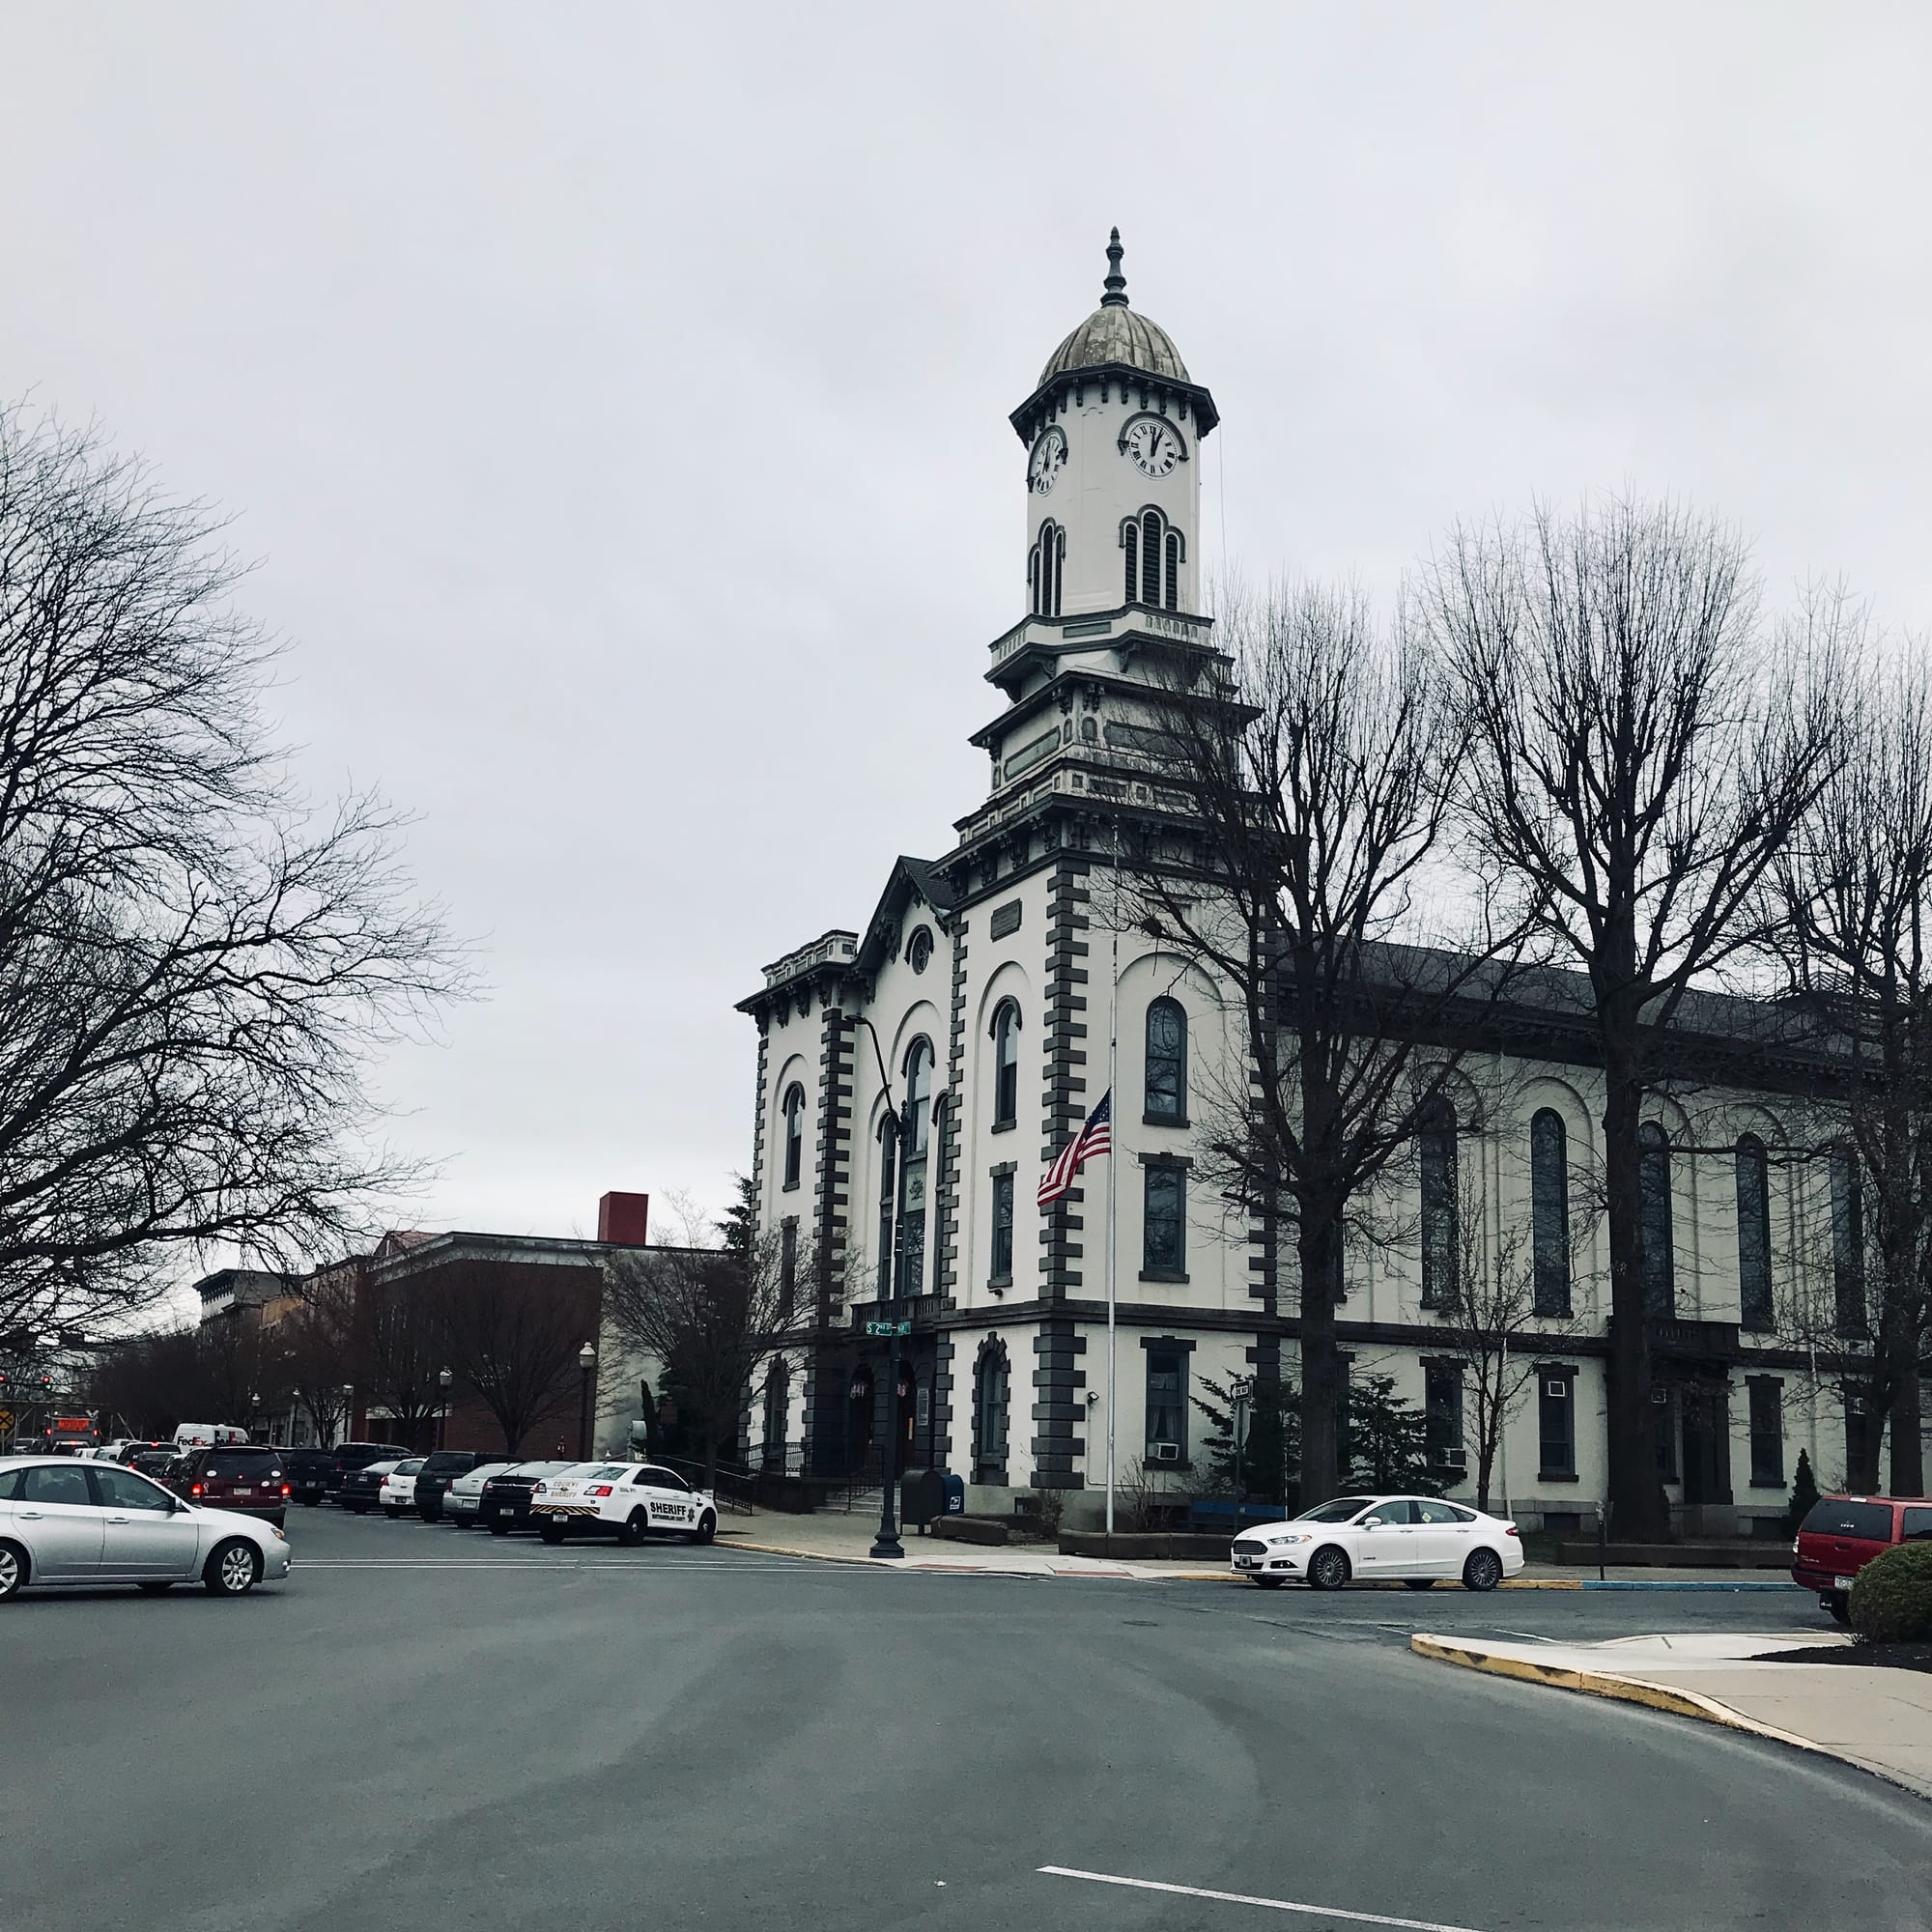 Northumberland  County courthouse, April 2019